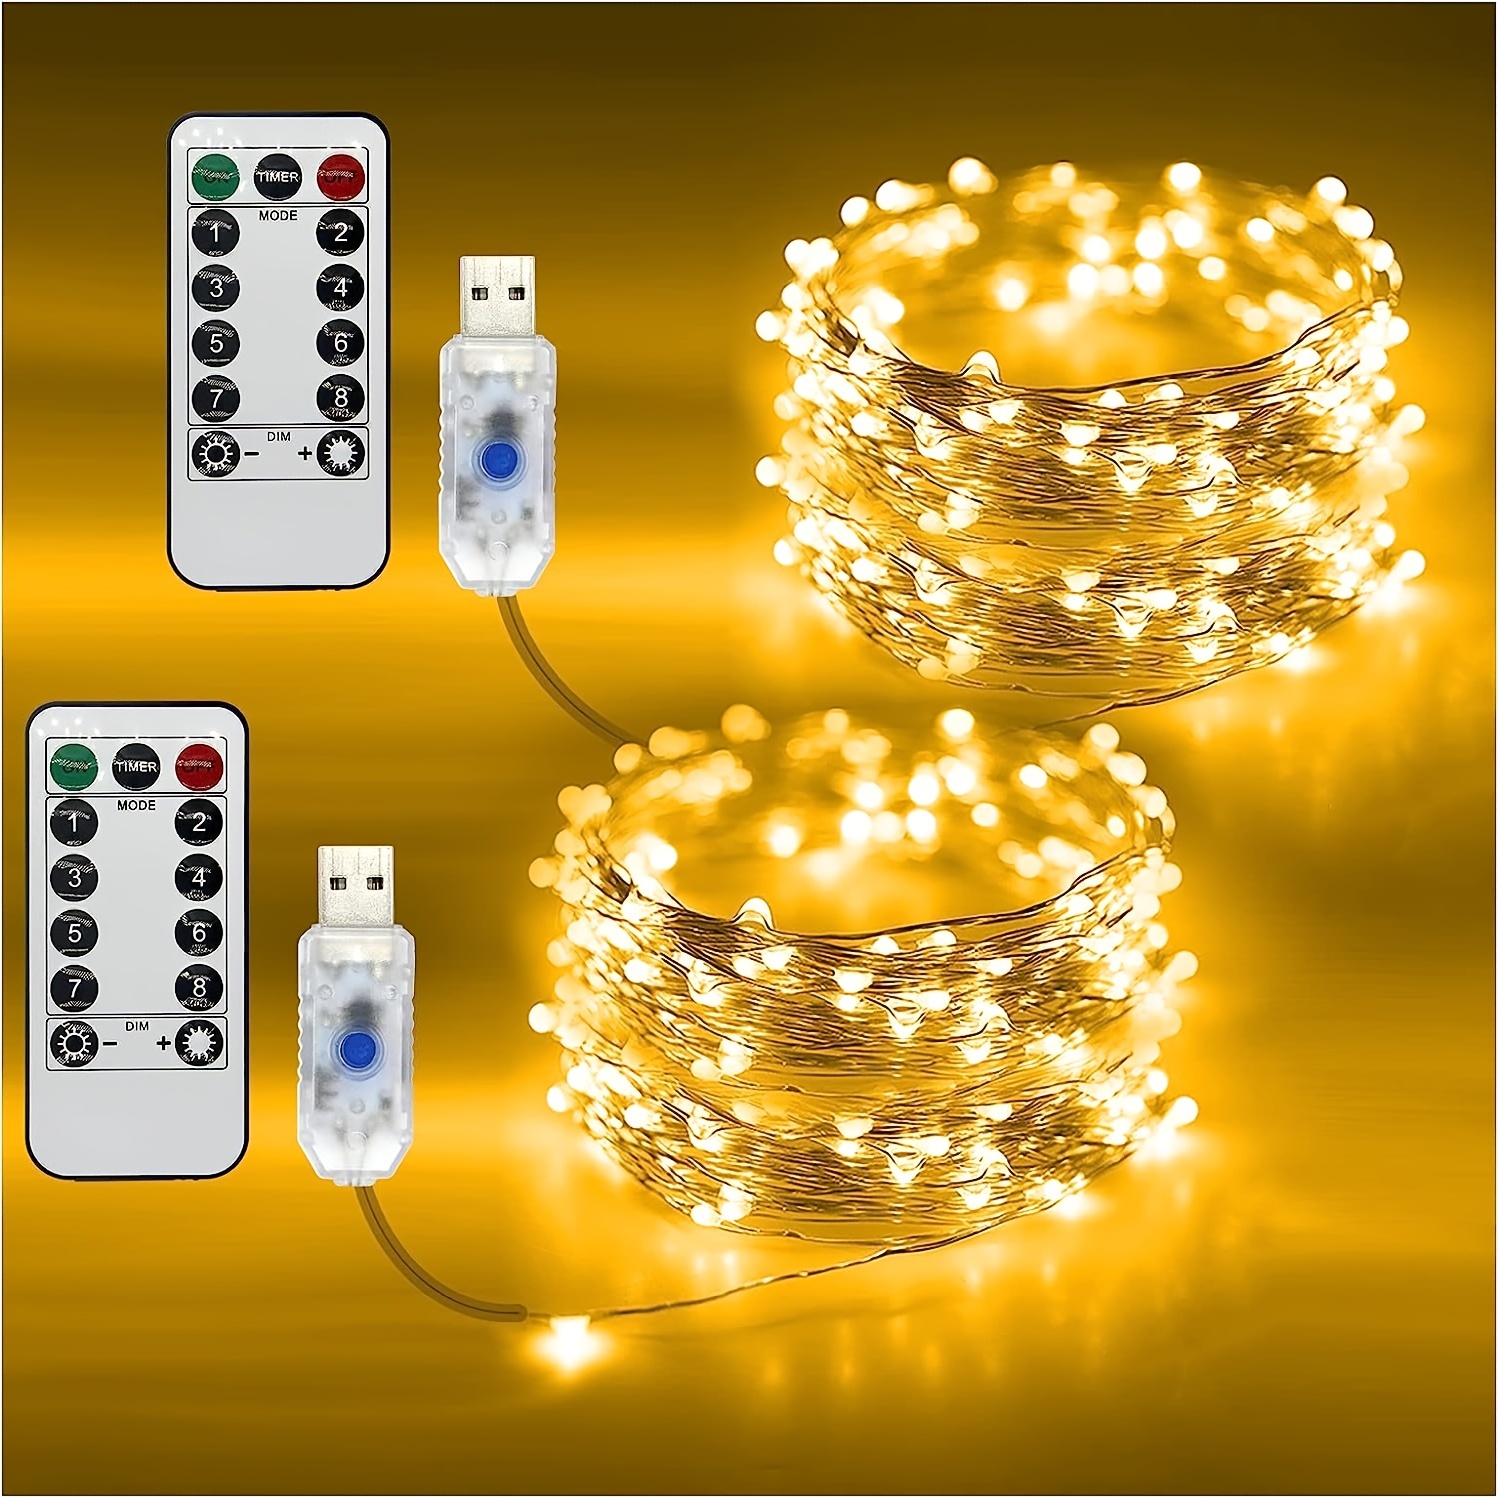 8 Modes 100 Led Fairy String Lights with Remote Control